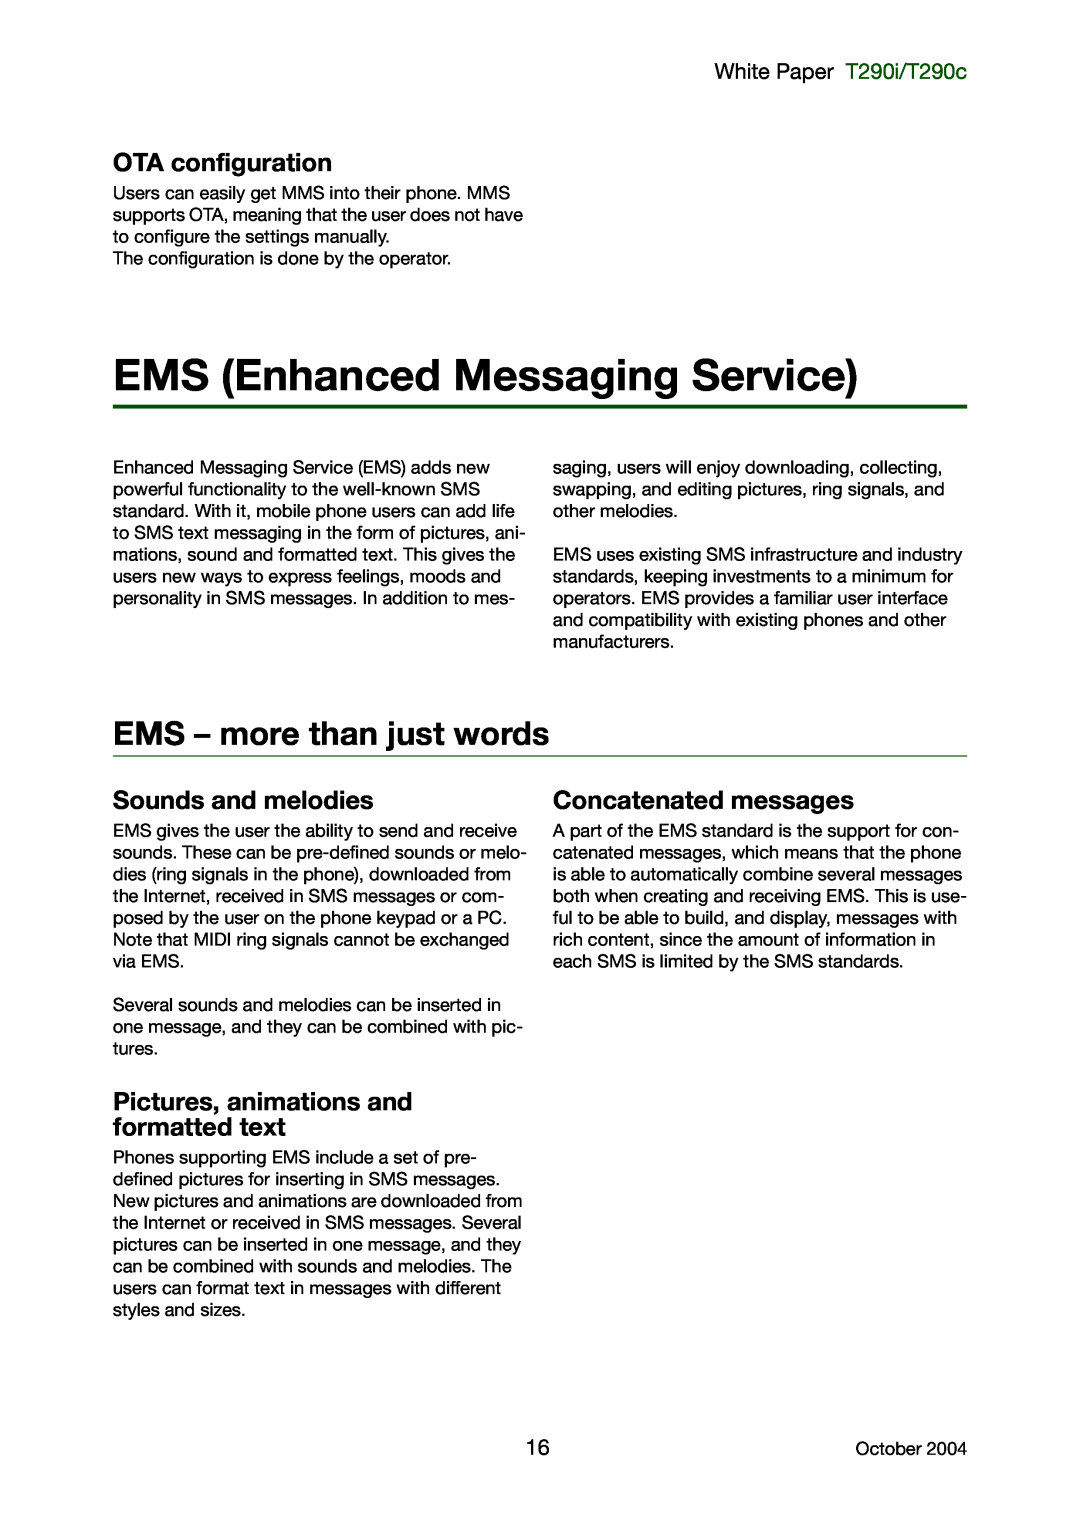 Sony Ericsson T290c EMS Enhanced Messaging Service, EMS - more than just words, OTA configuration, Sounds and melodies 